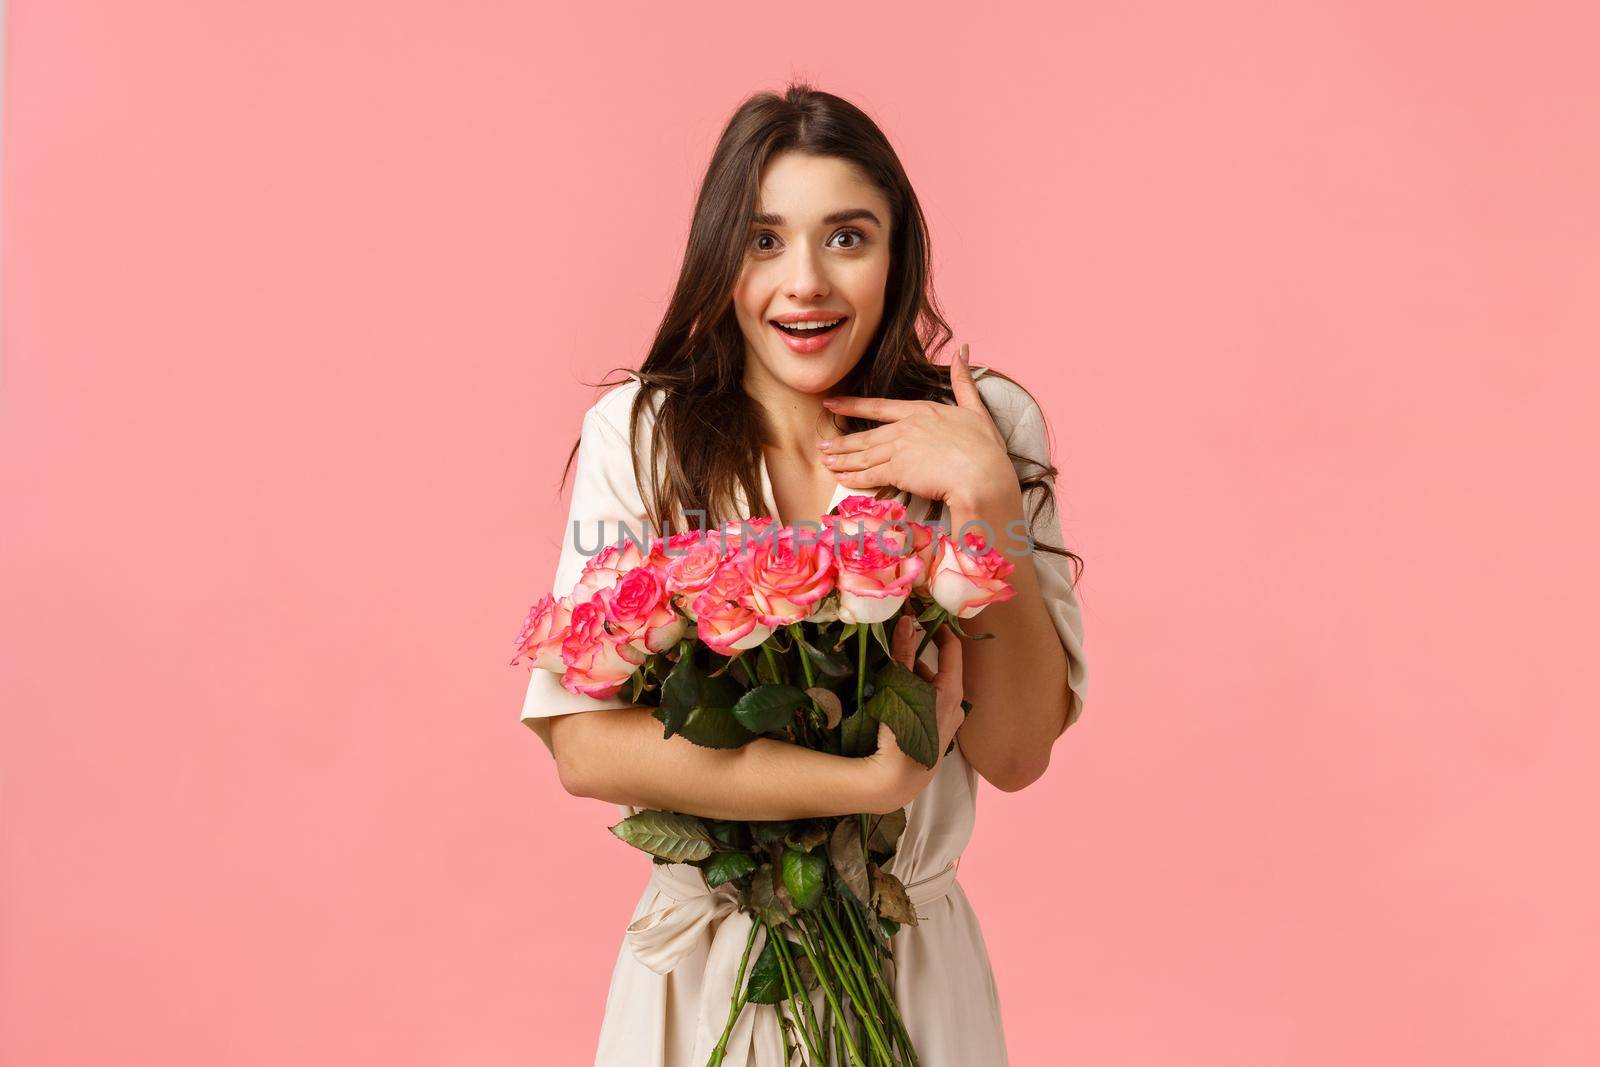 Surprised girl astonished and touched with beautiful roses boyfriend brought on date. Attractive young woman in dress, smiling and gasping flattered, holding stunning bouquet, pink background.